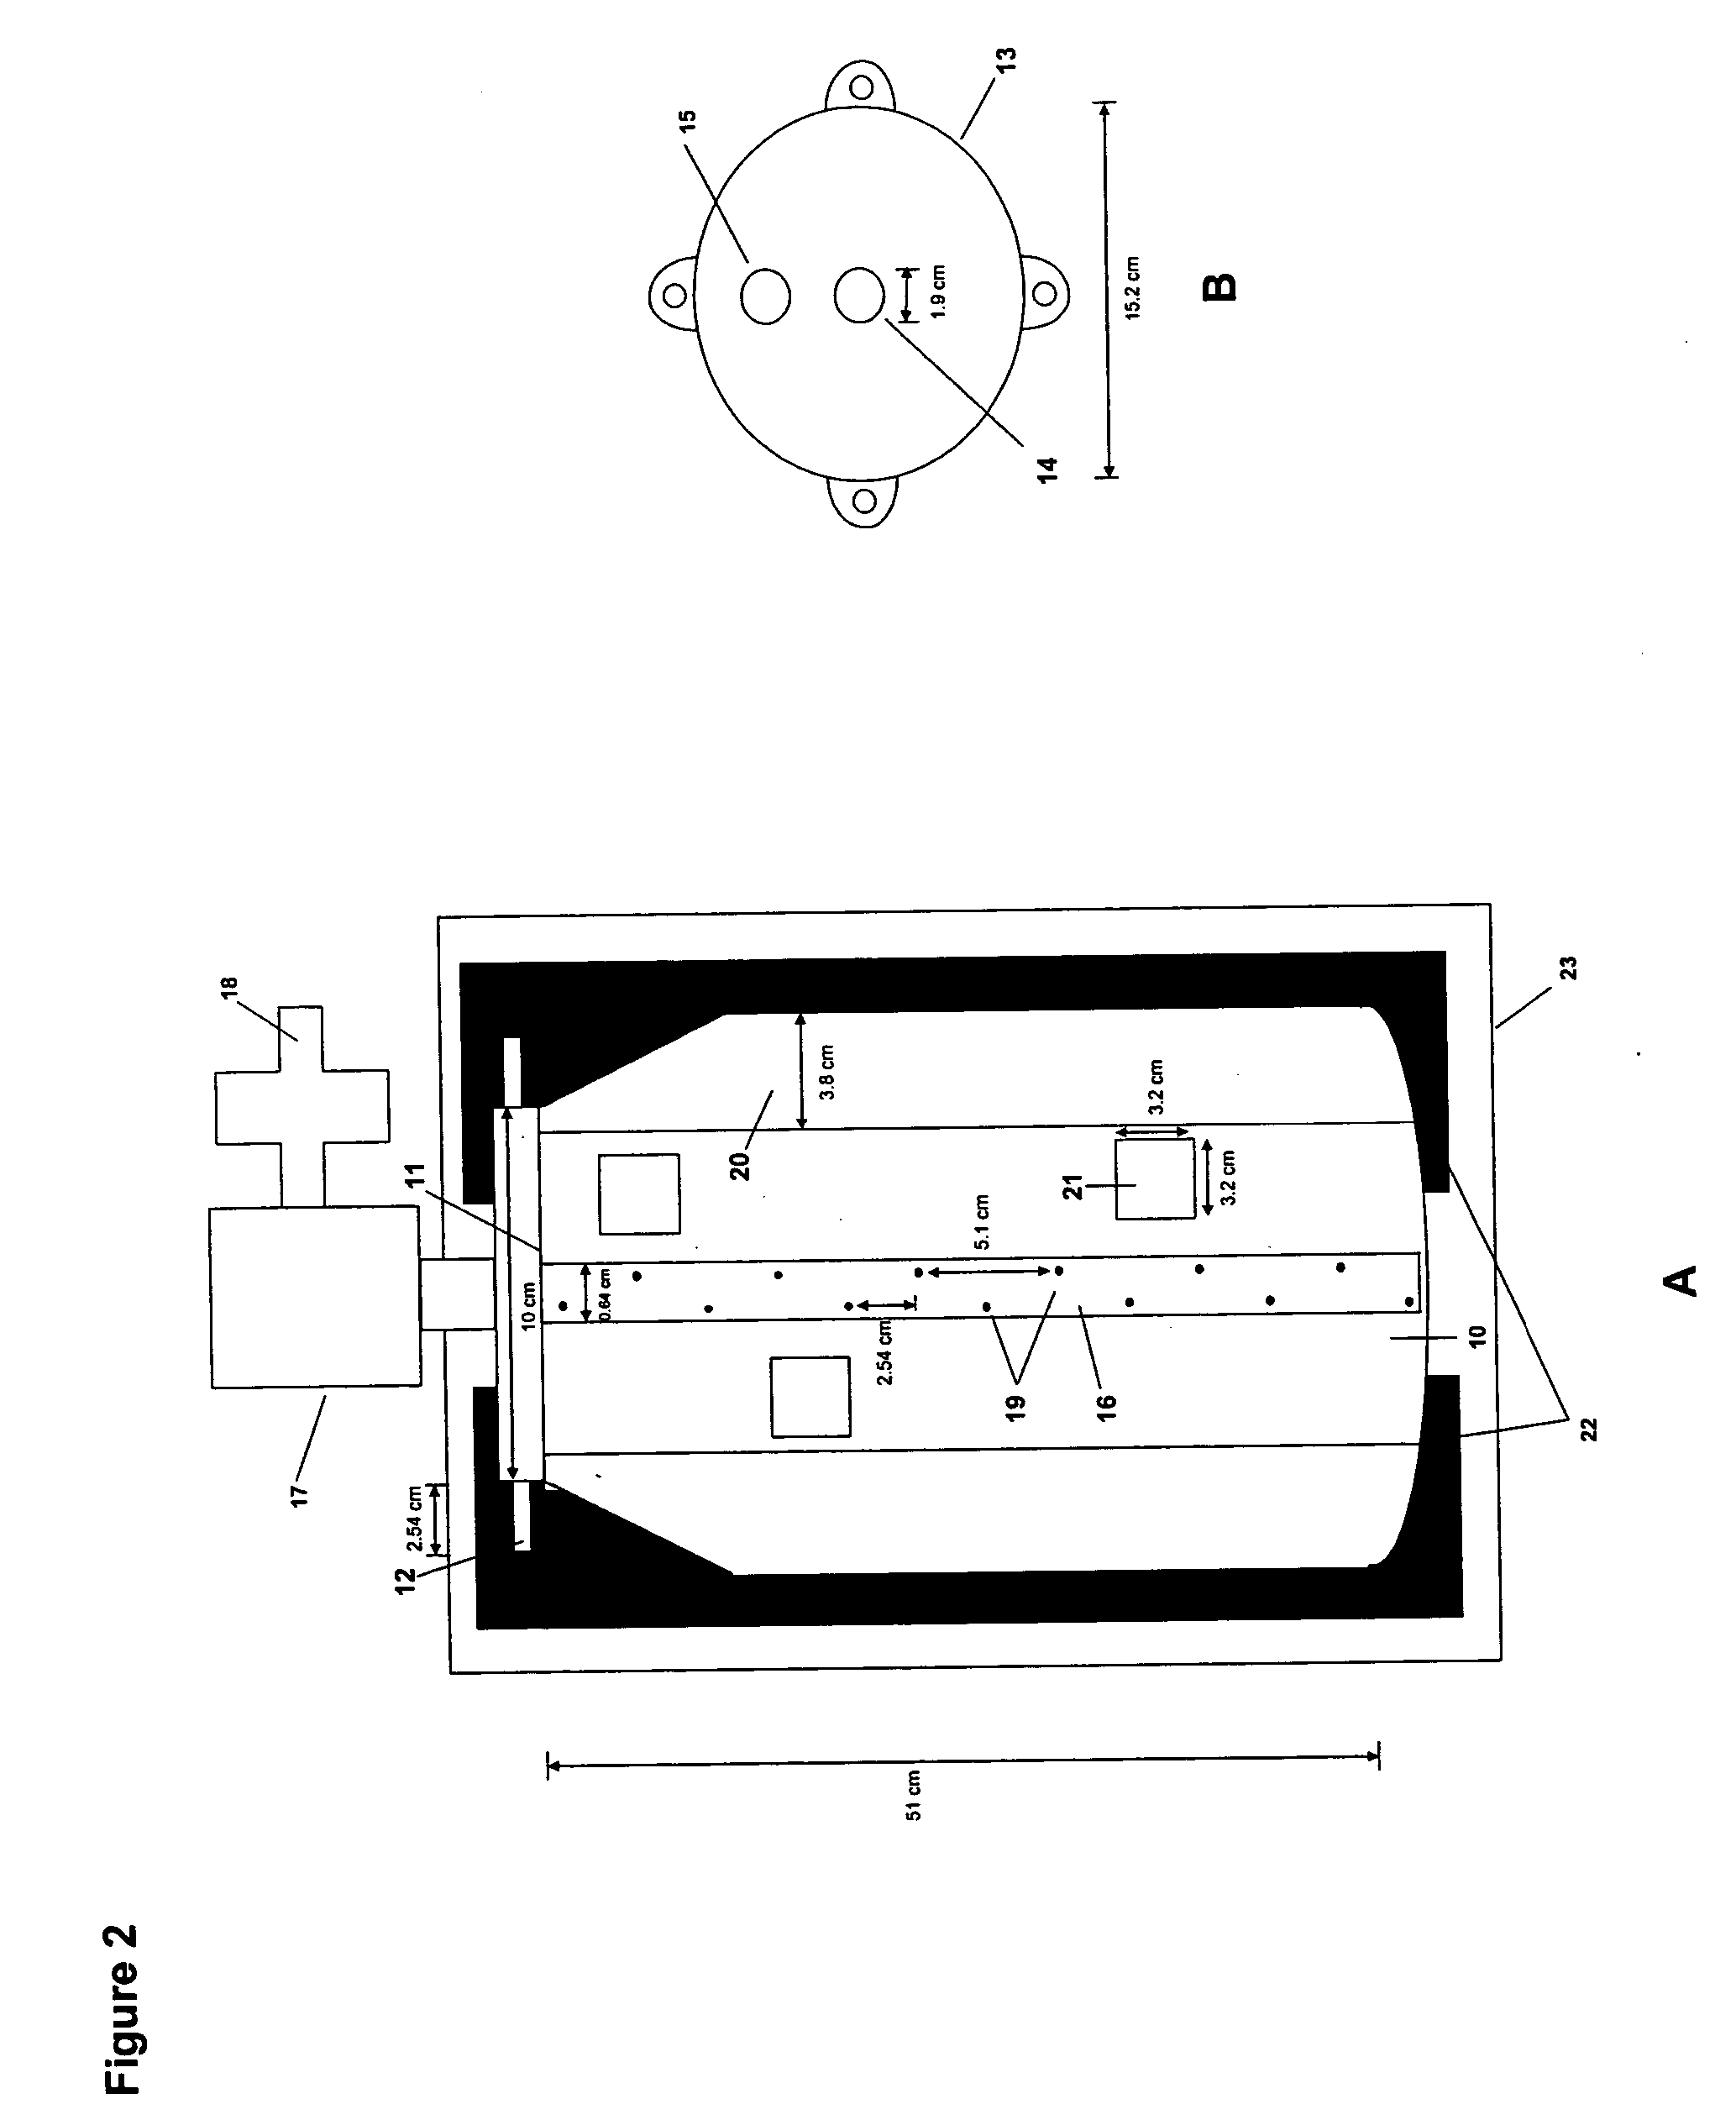 System and process for biomass treatment